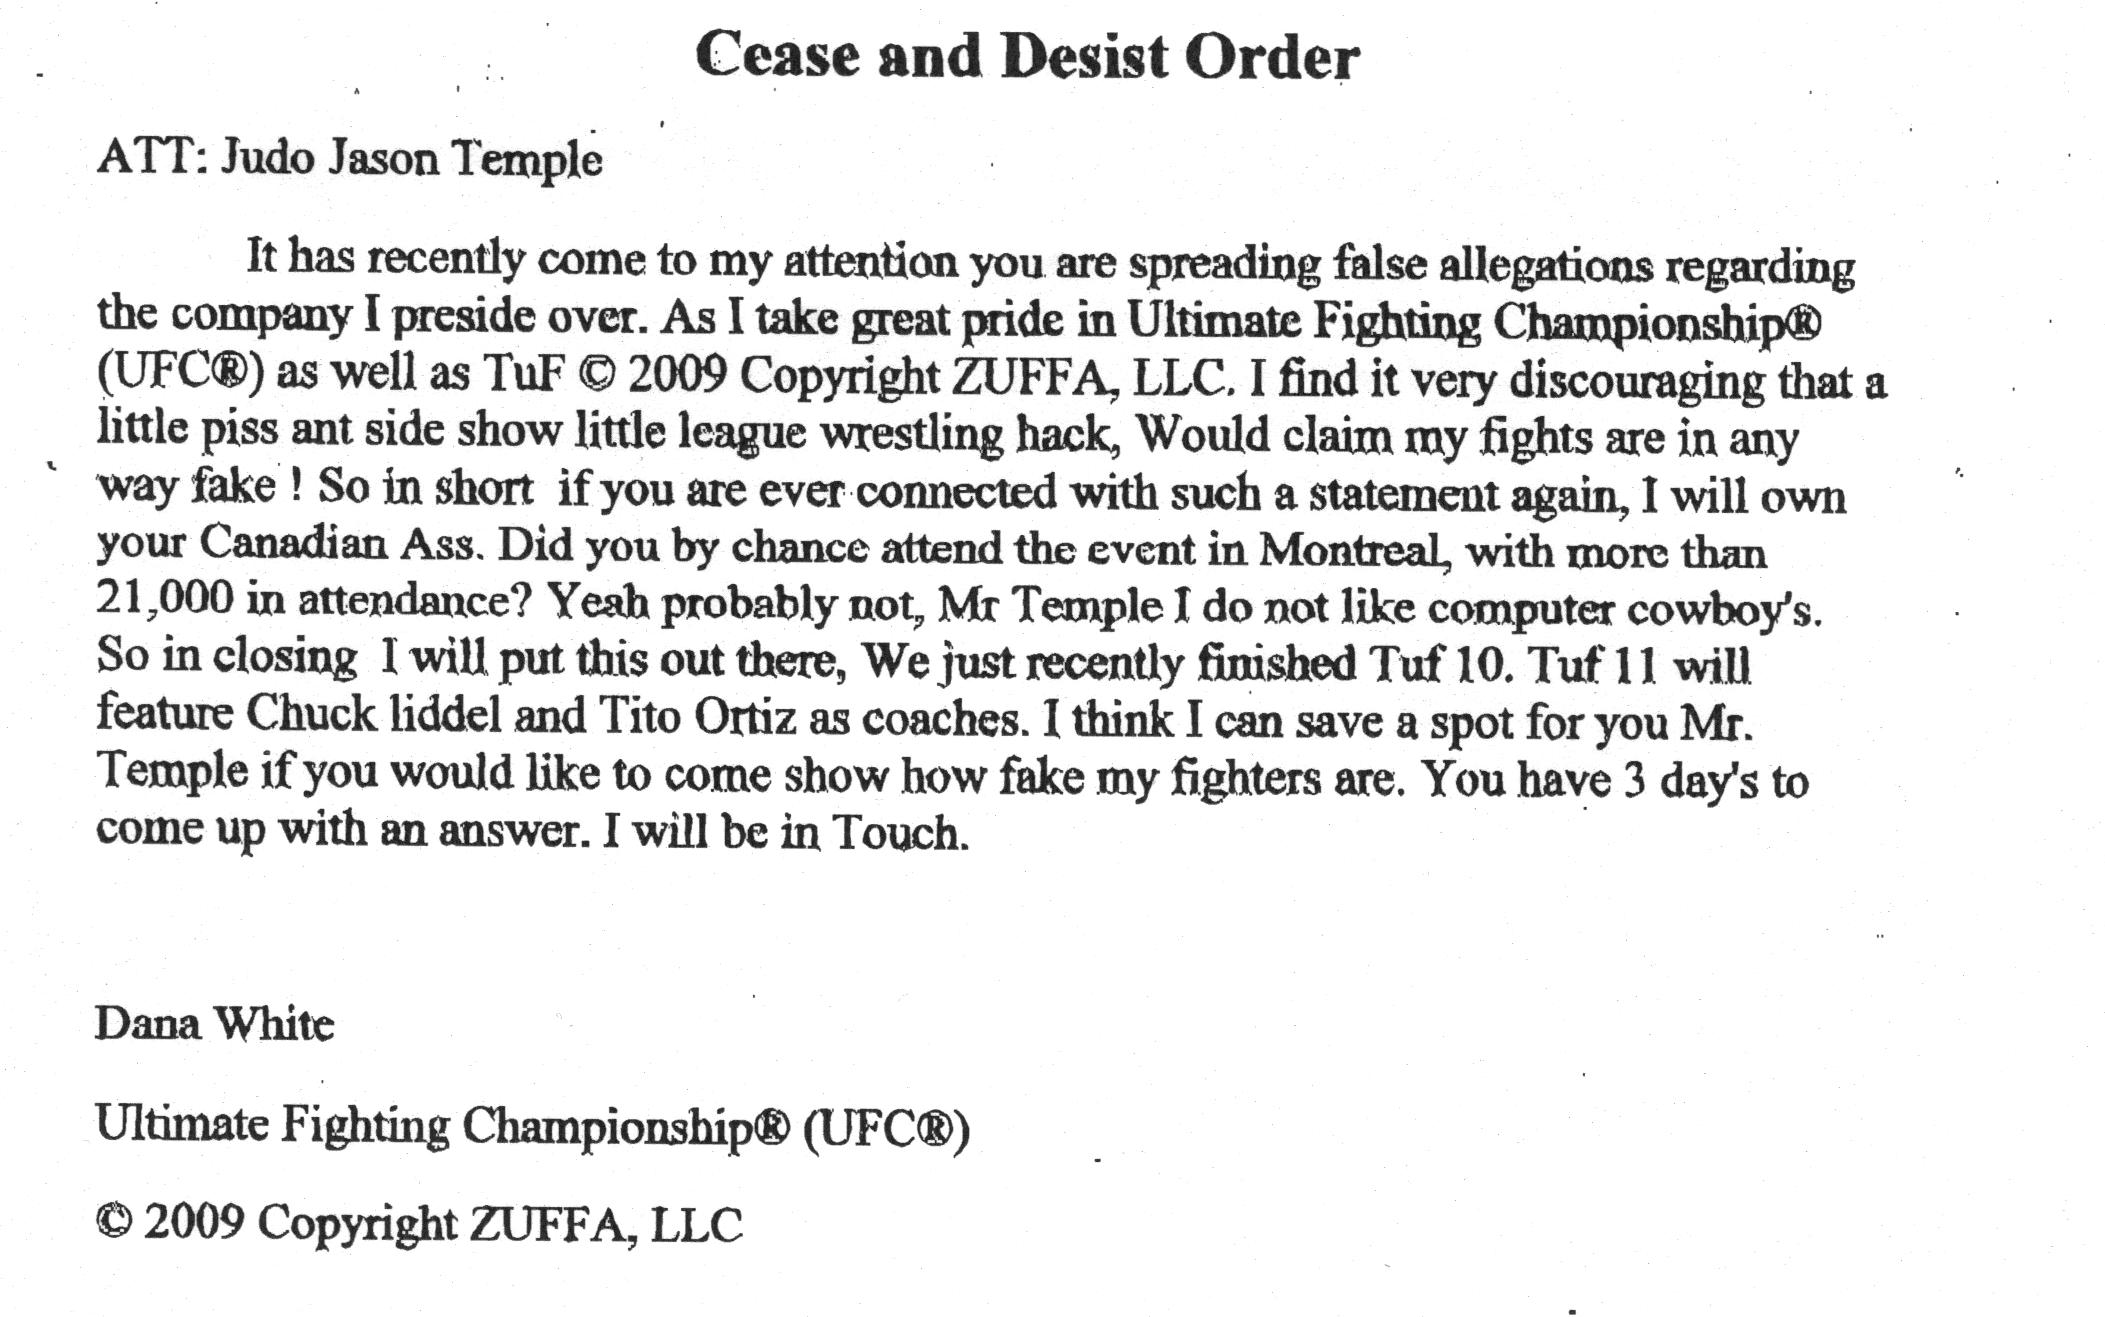 alright.  Keep in mind "Judo Jason Temple" is Me, and to set the stage, I truly beleive that UFC is planned at higher levels as to who wins and looses.  Great prank, this was actually faxed to me at work.